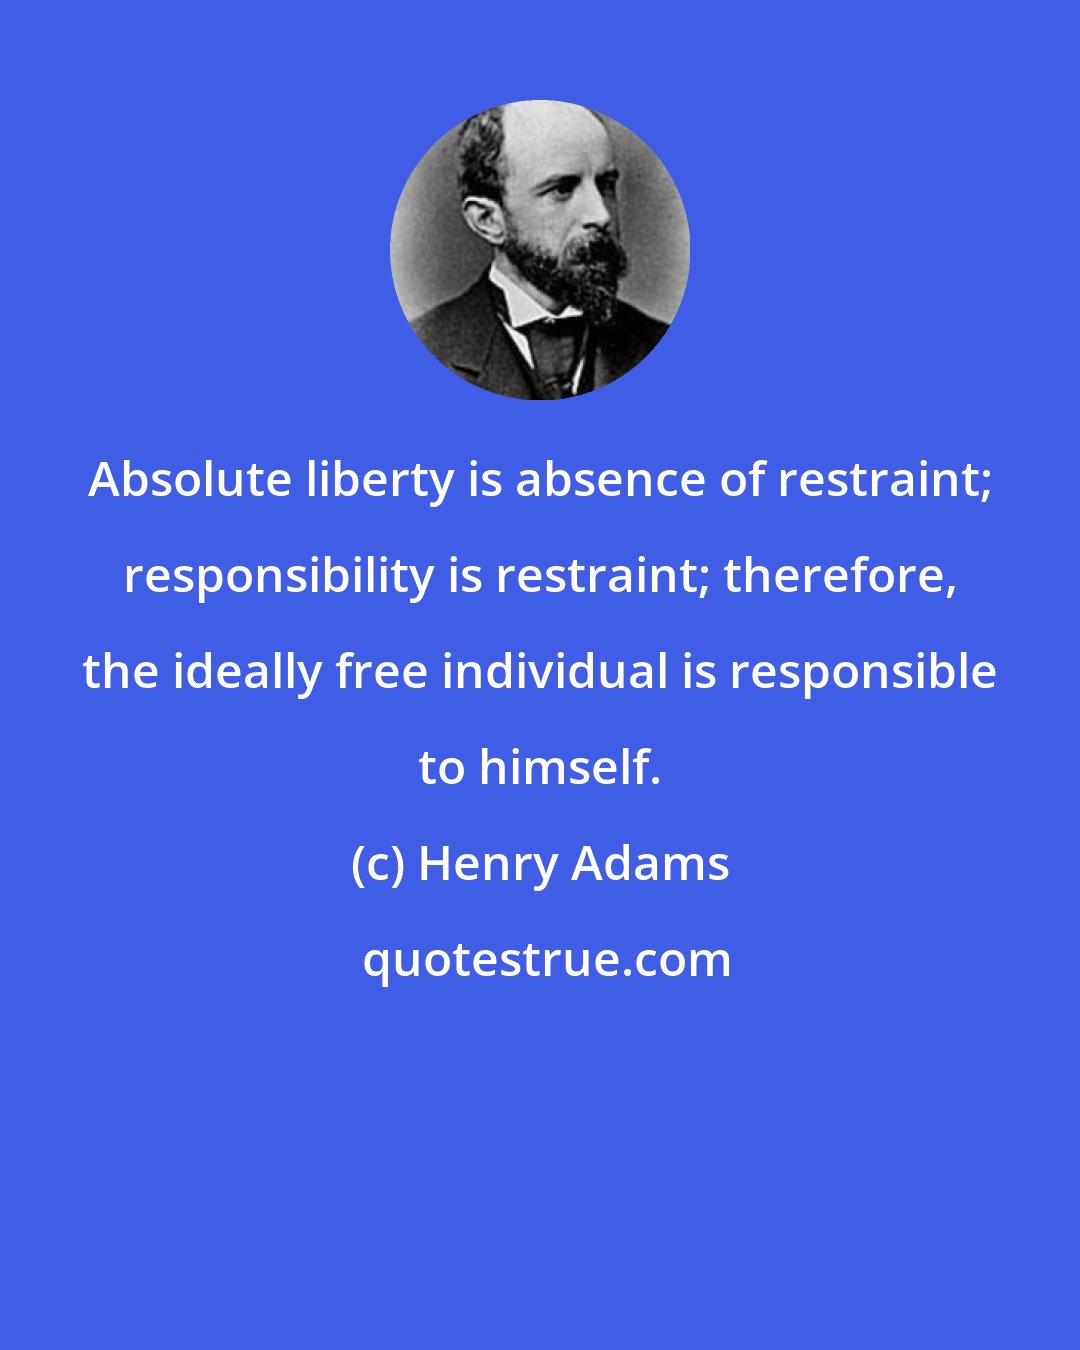 Henry Adams: Absolute liberty is absence of restraint; responsibility is restraint; therefore, the ideally free individual is responsible to himself.